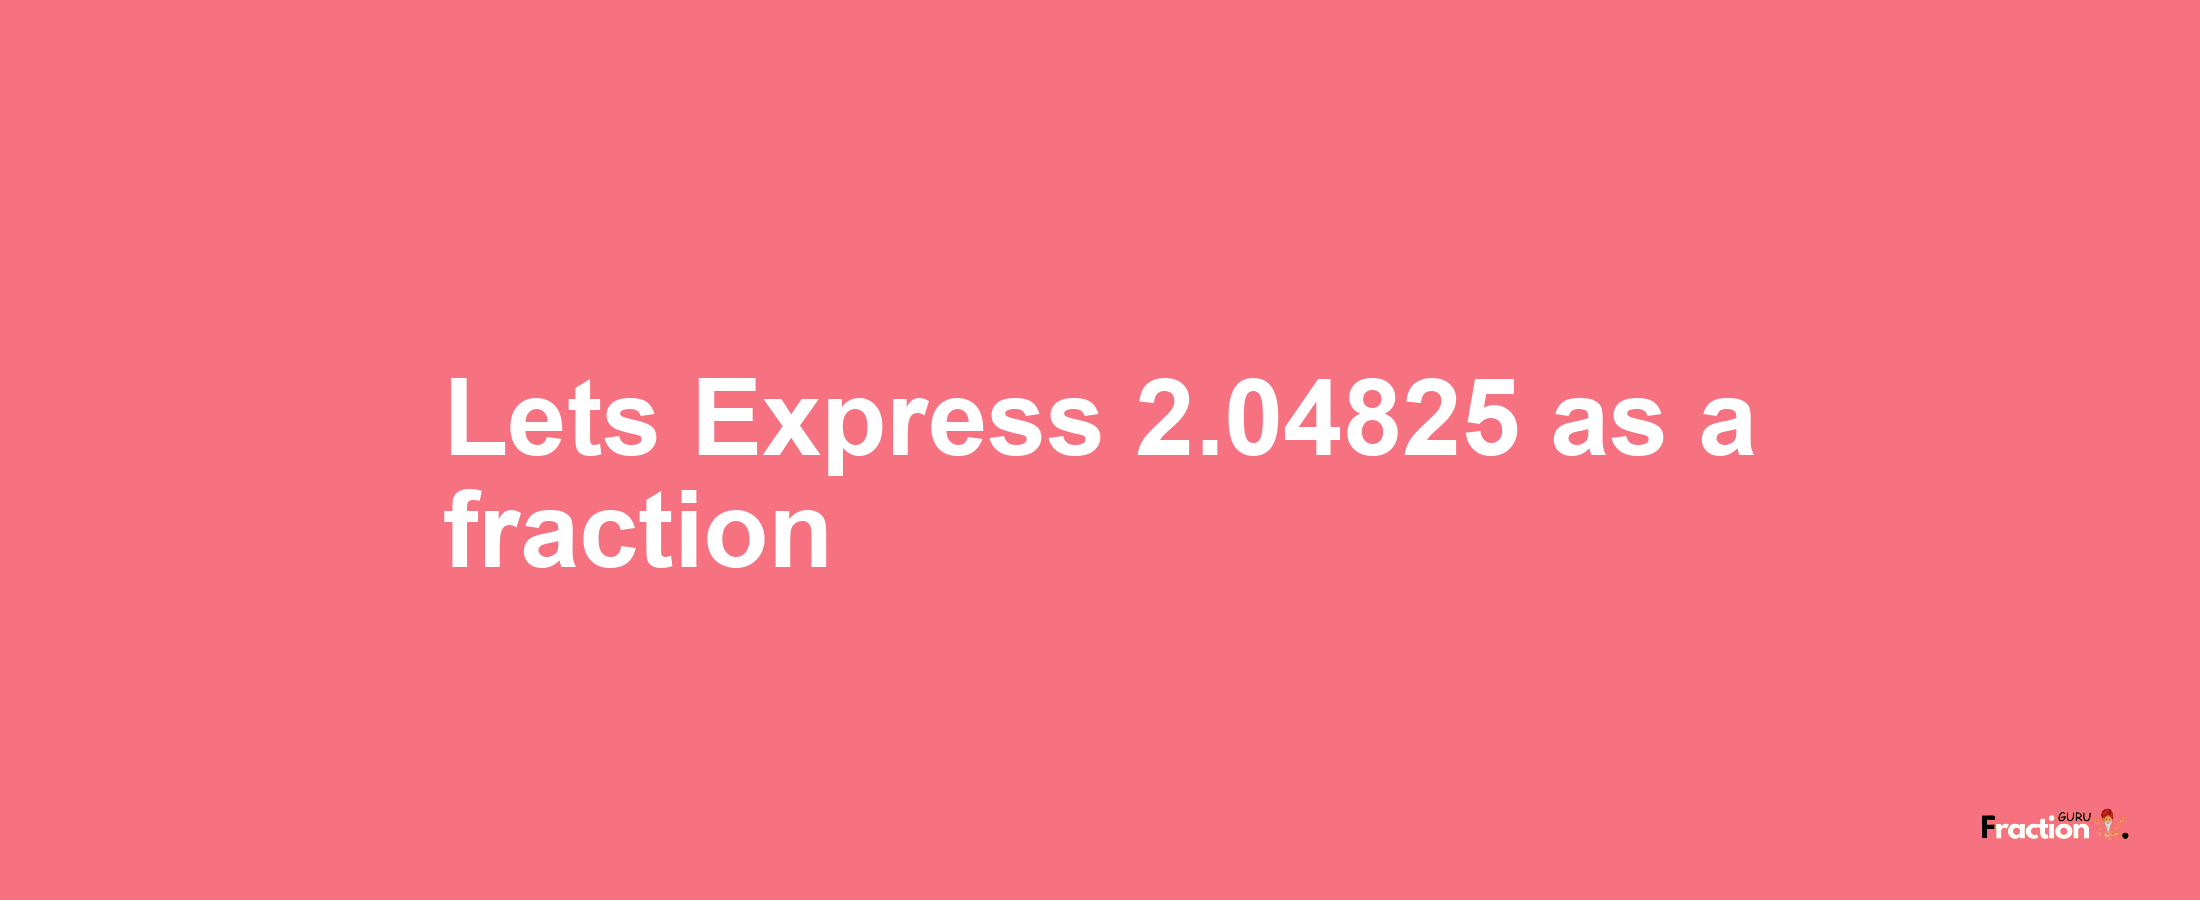 Lets Express 2.04825 as afraction